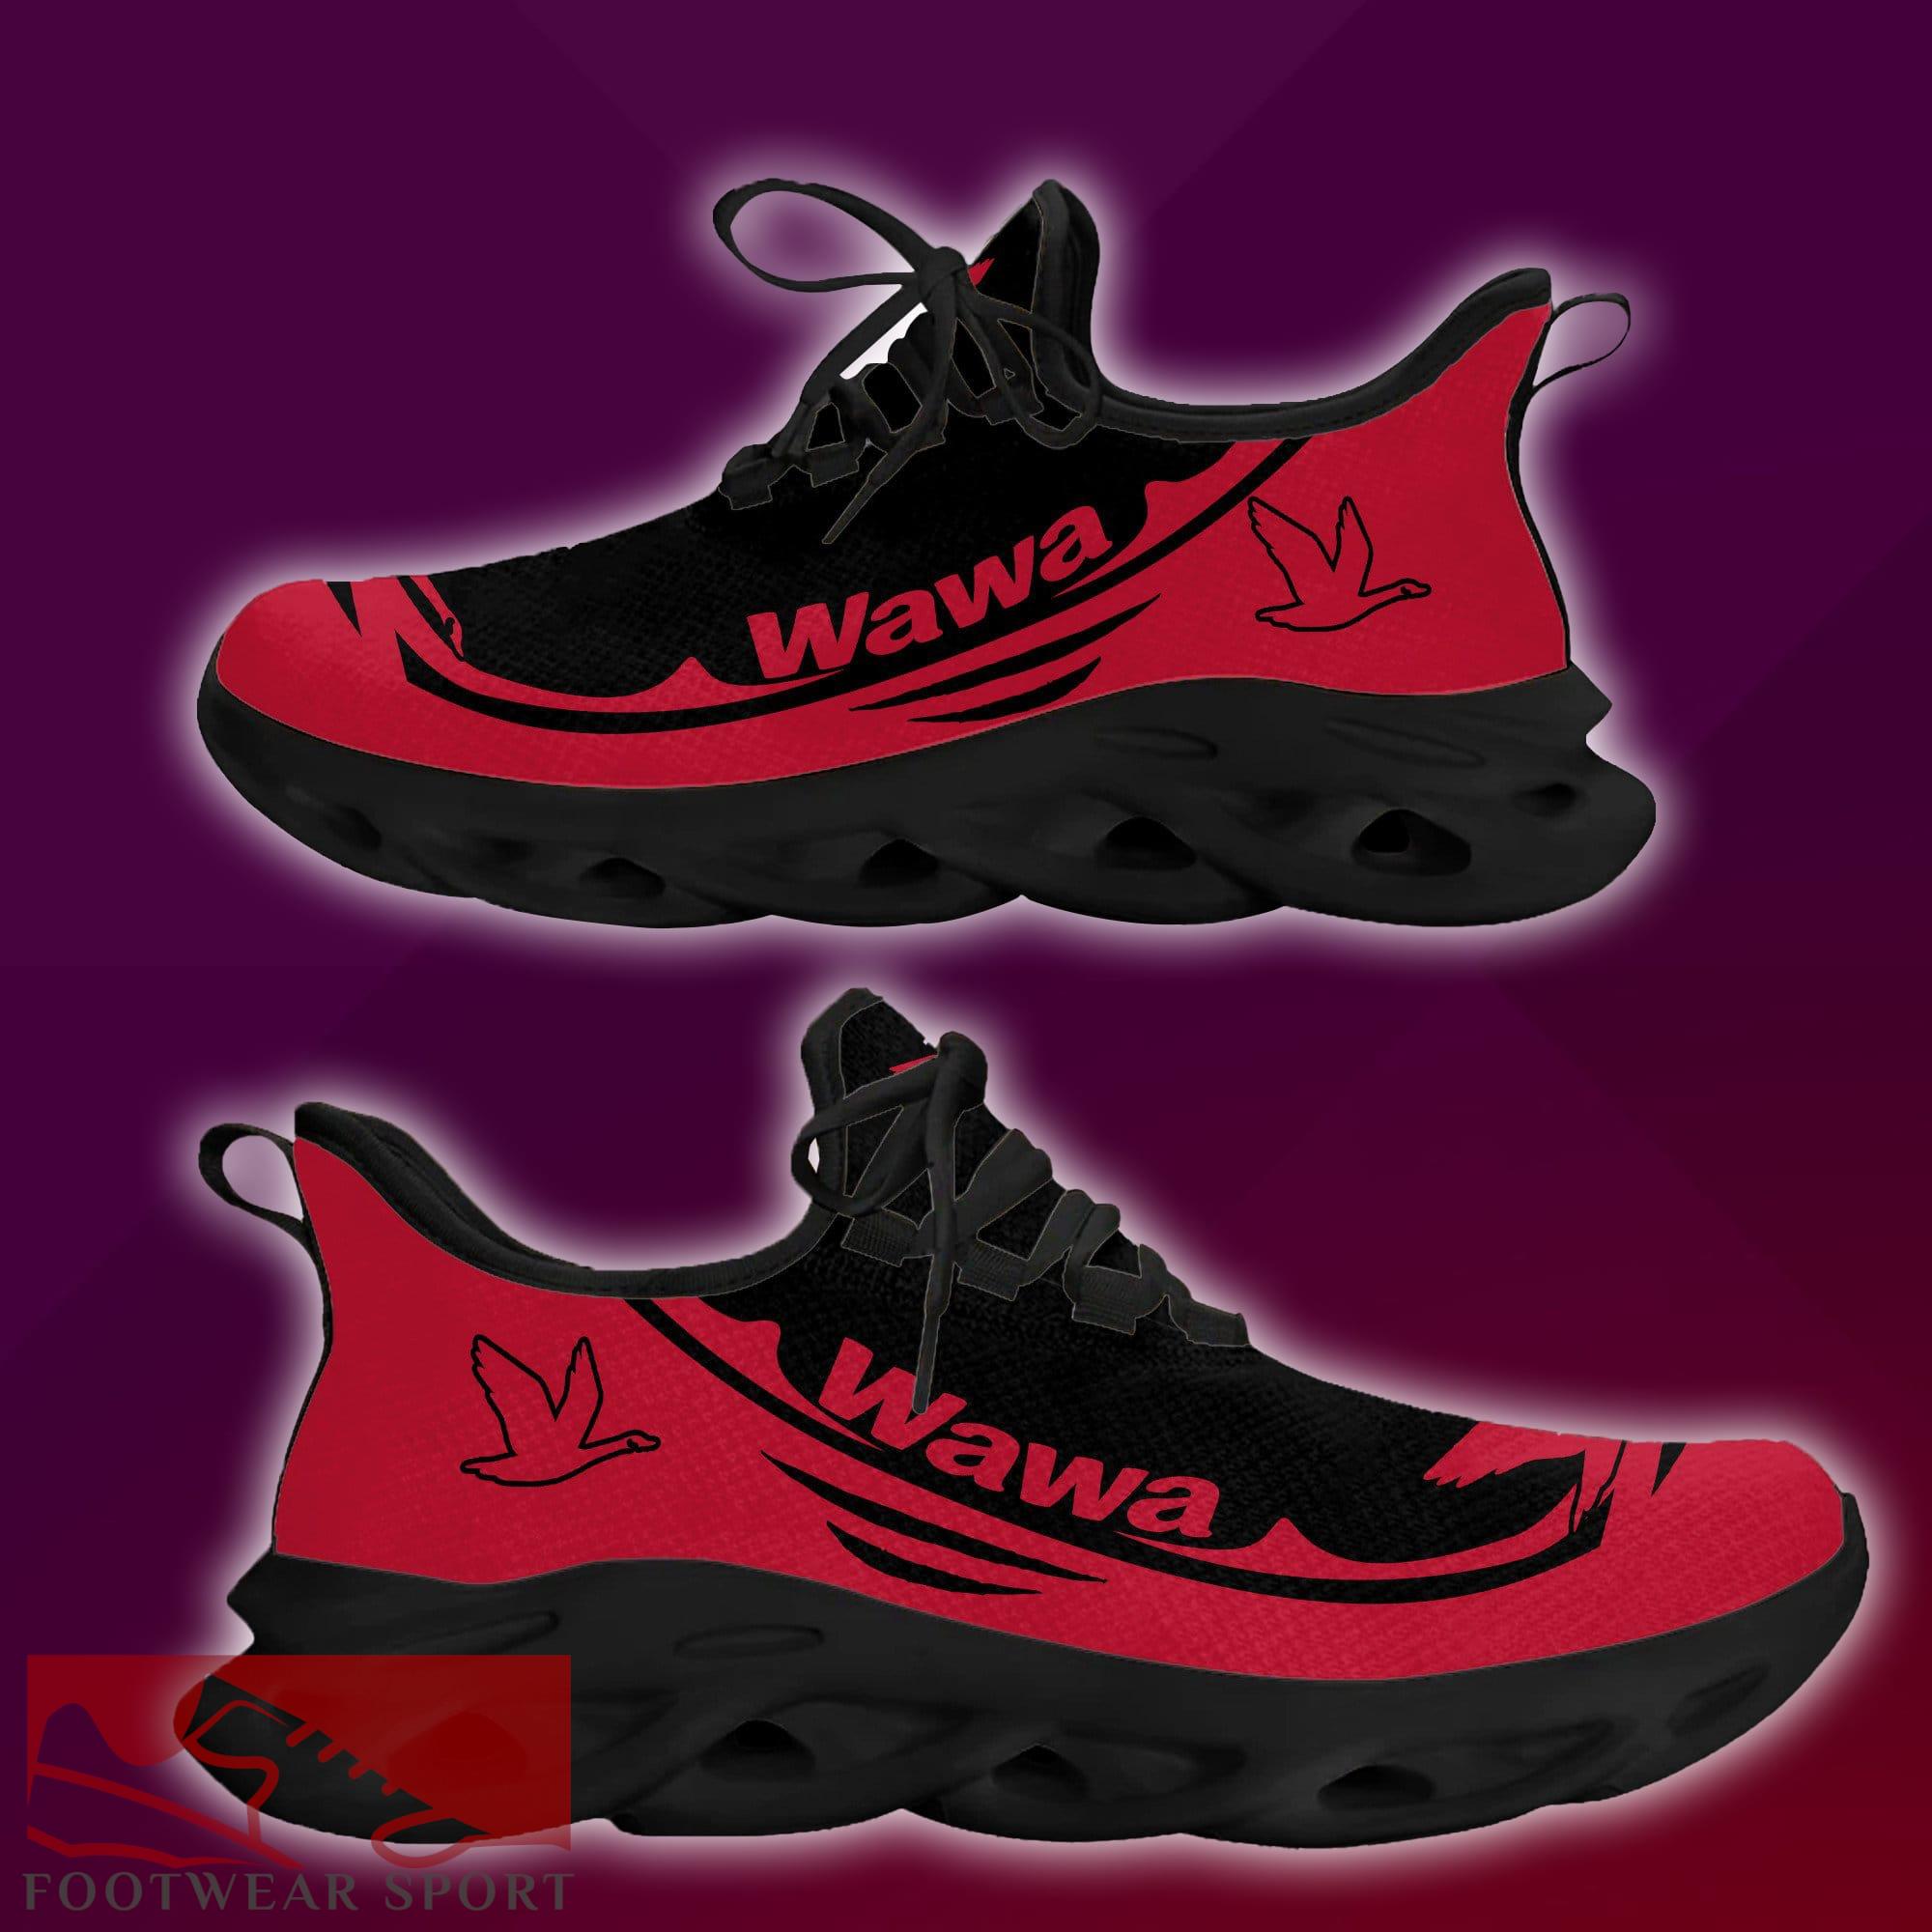 WAWA Brand New Logo Max Soul Sneakers Trendy Running Shoes Gift - WAWA New Brand Chunky Shoes Style Max Soul Sneakers Photo 1